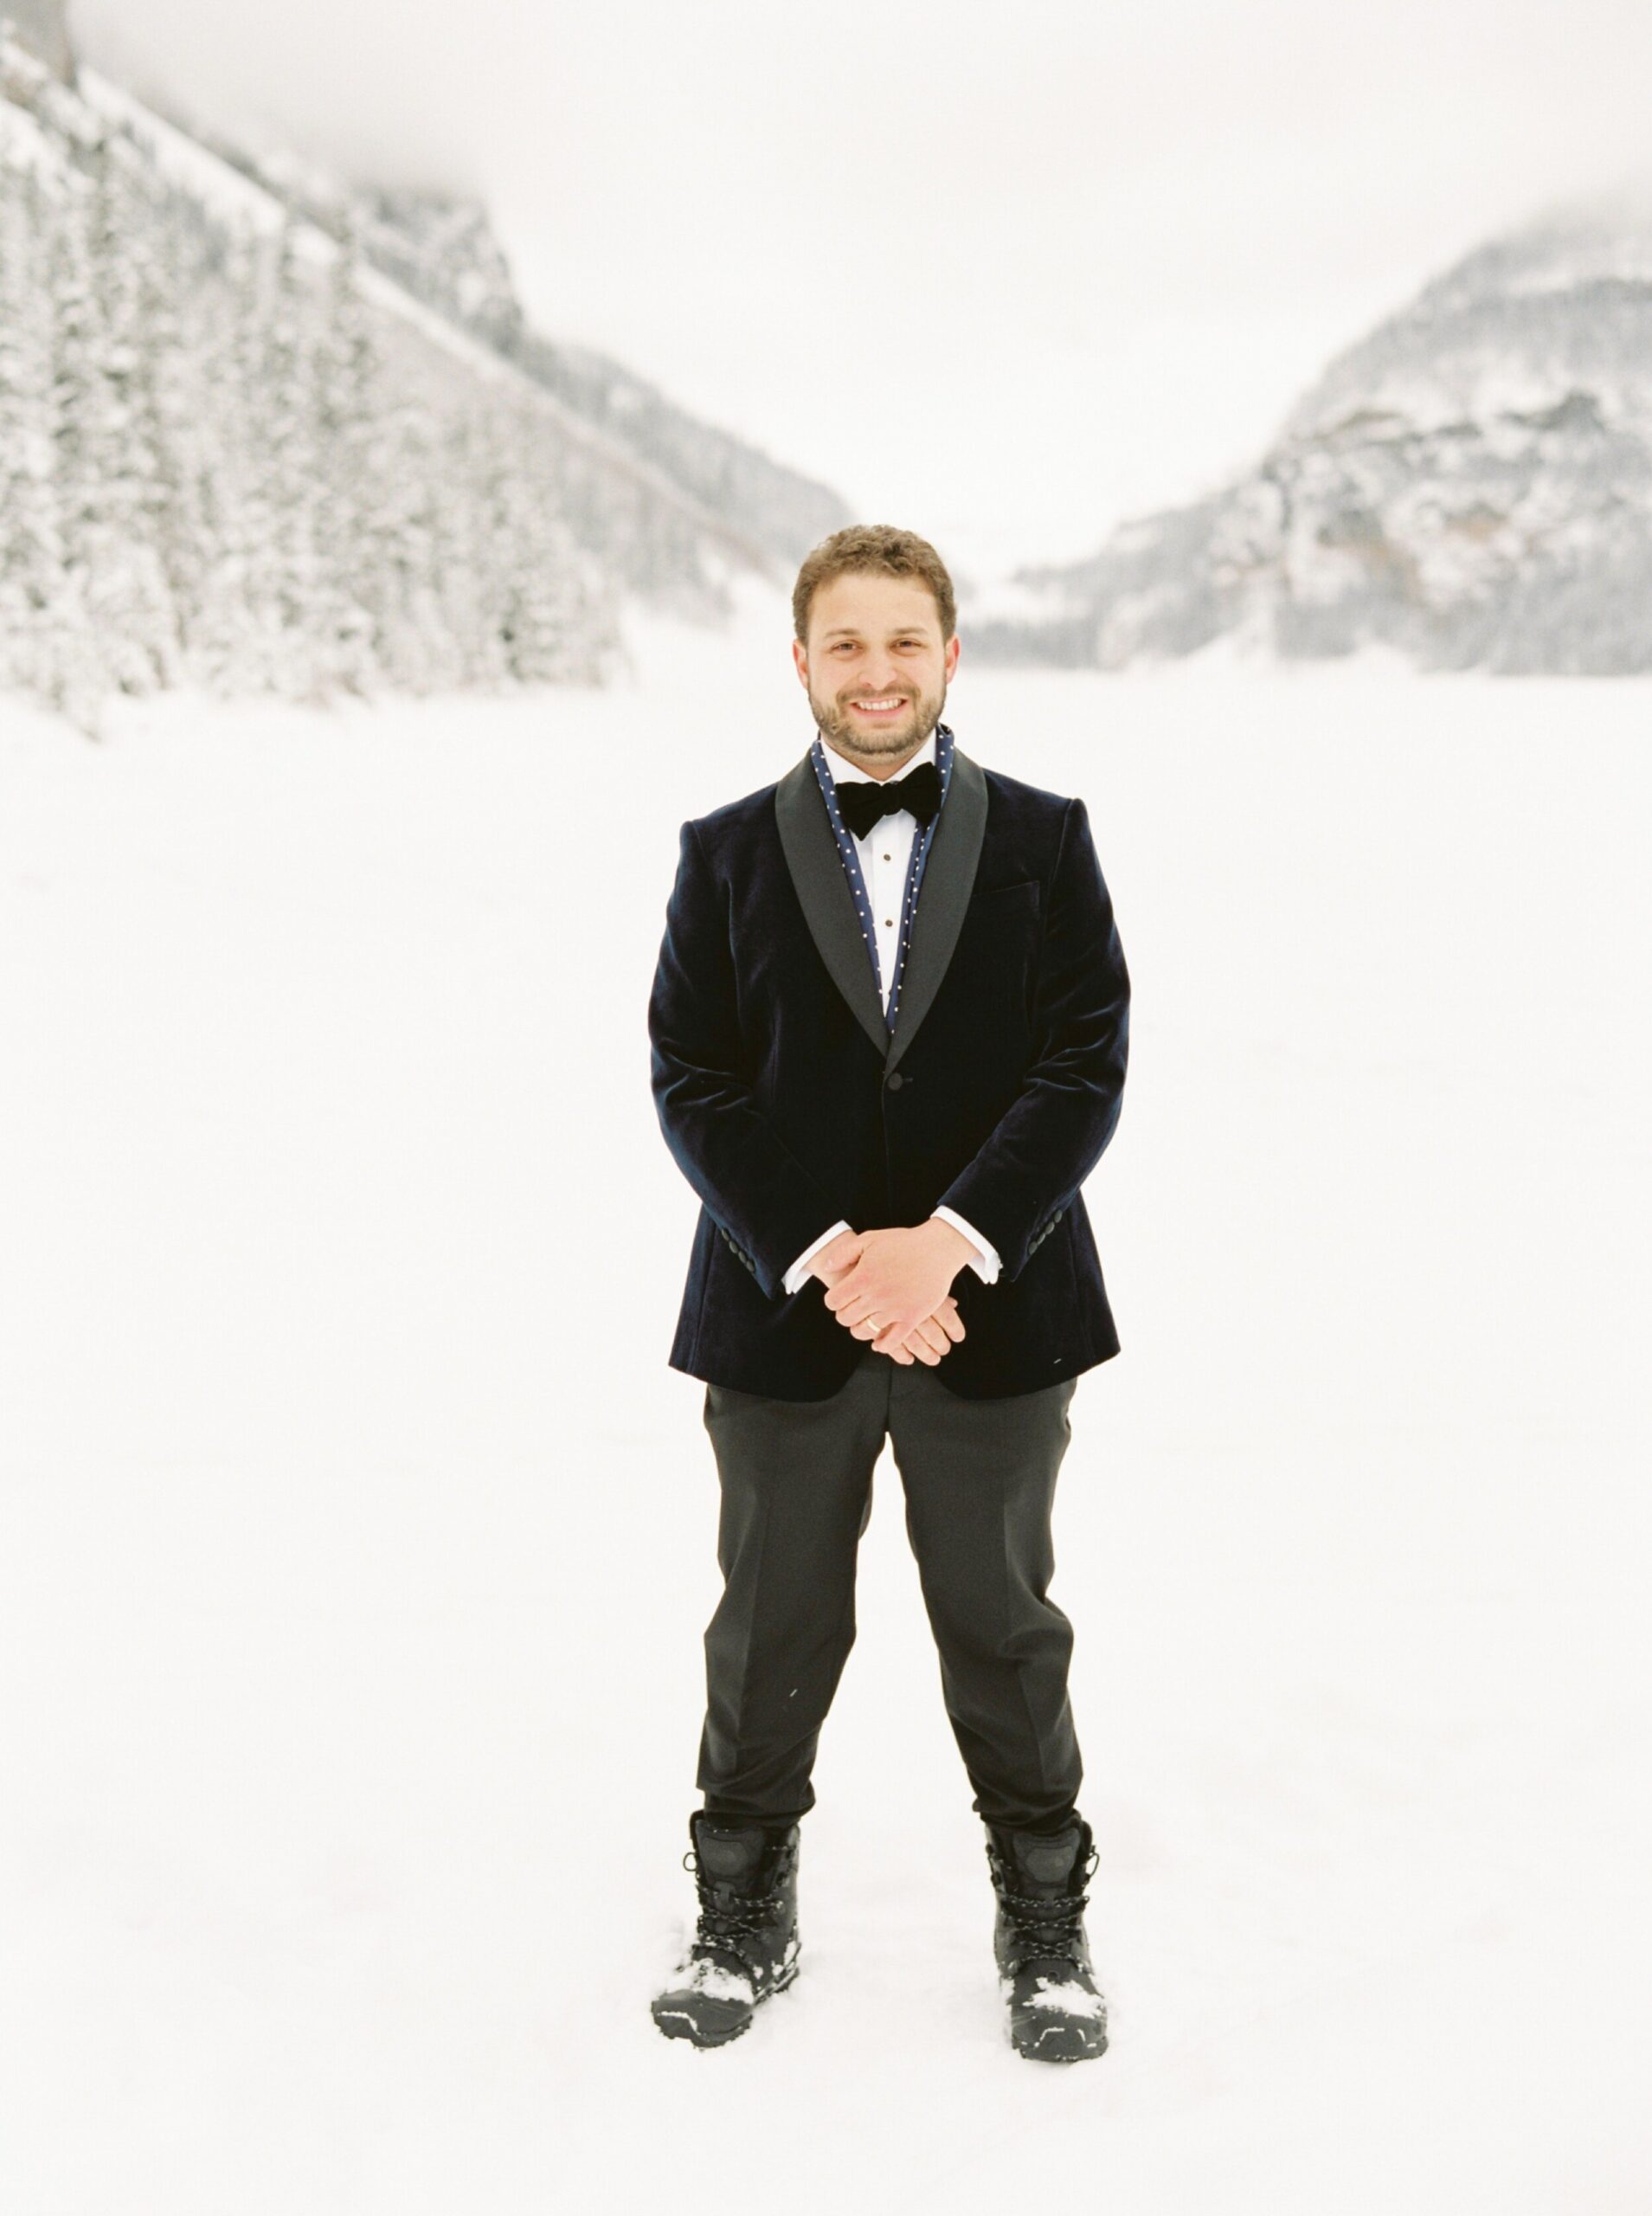  Lake louise winter wonderland wedding | fitted wedding dress with giant bow 